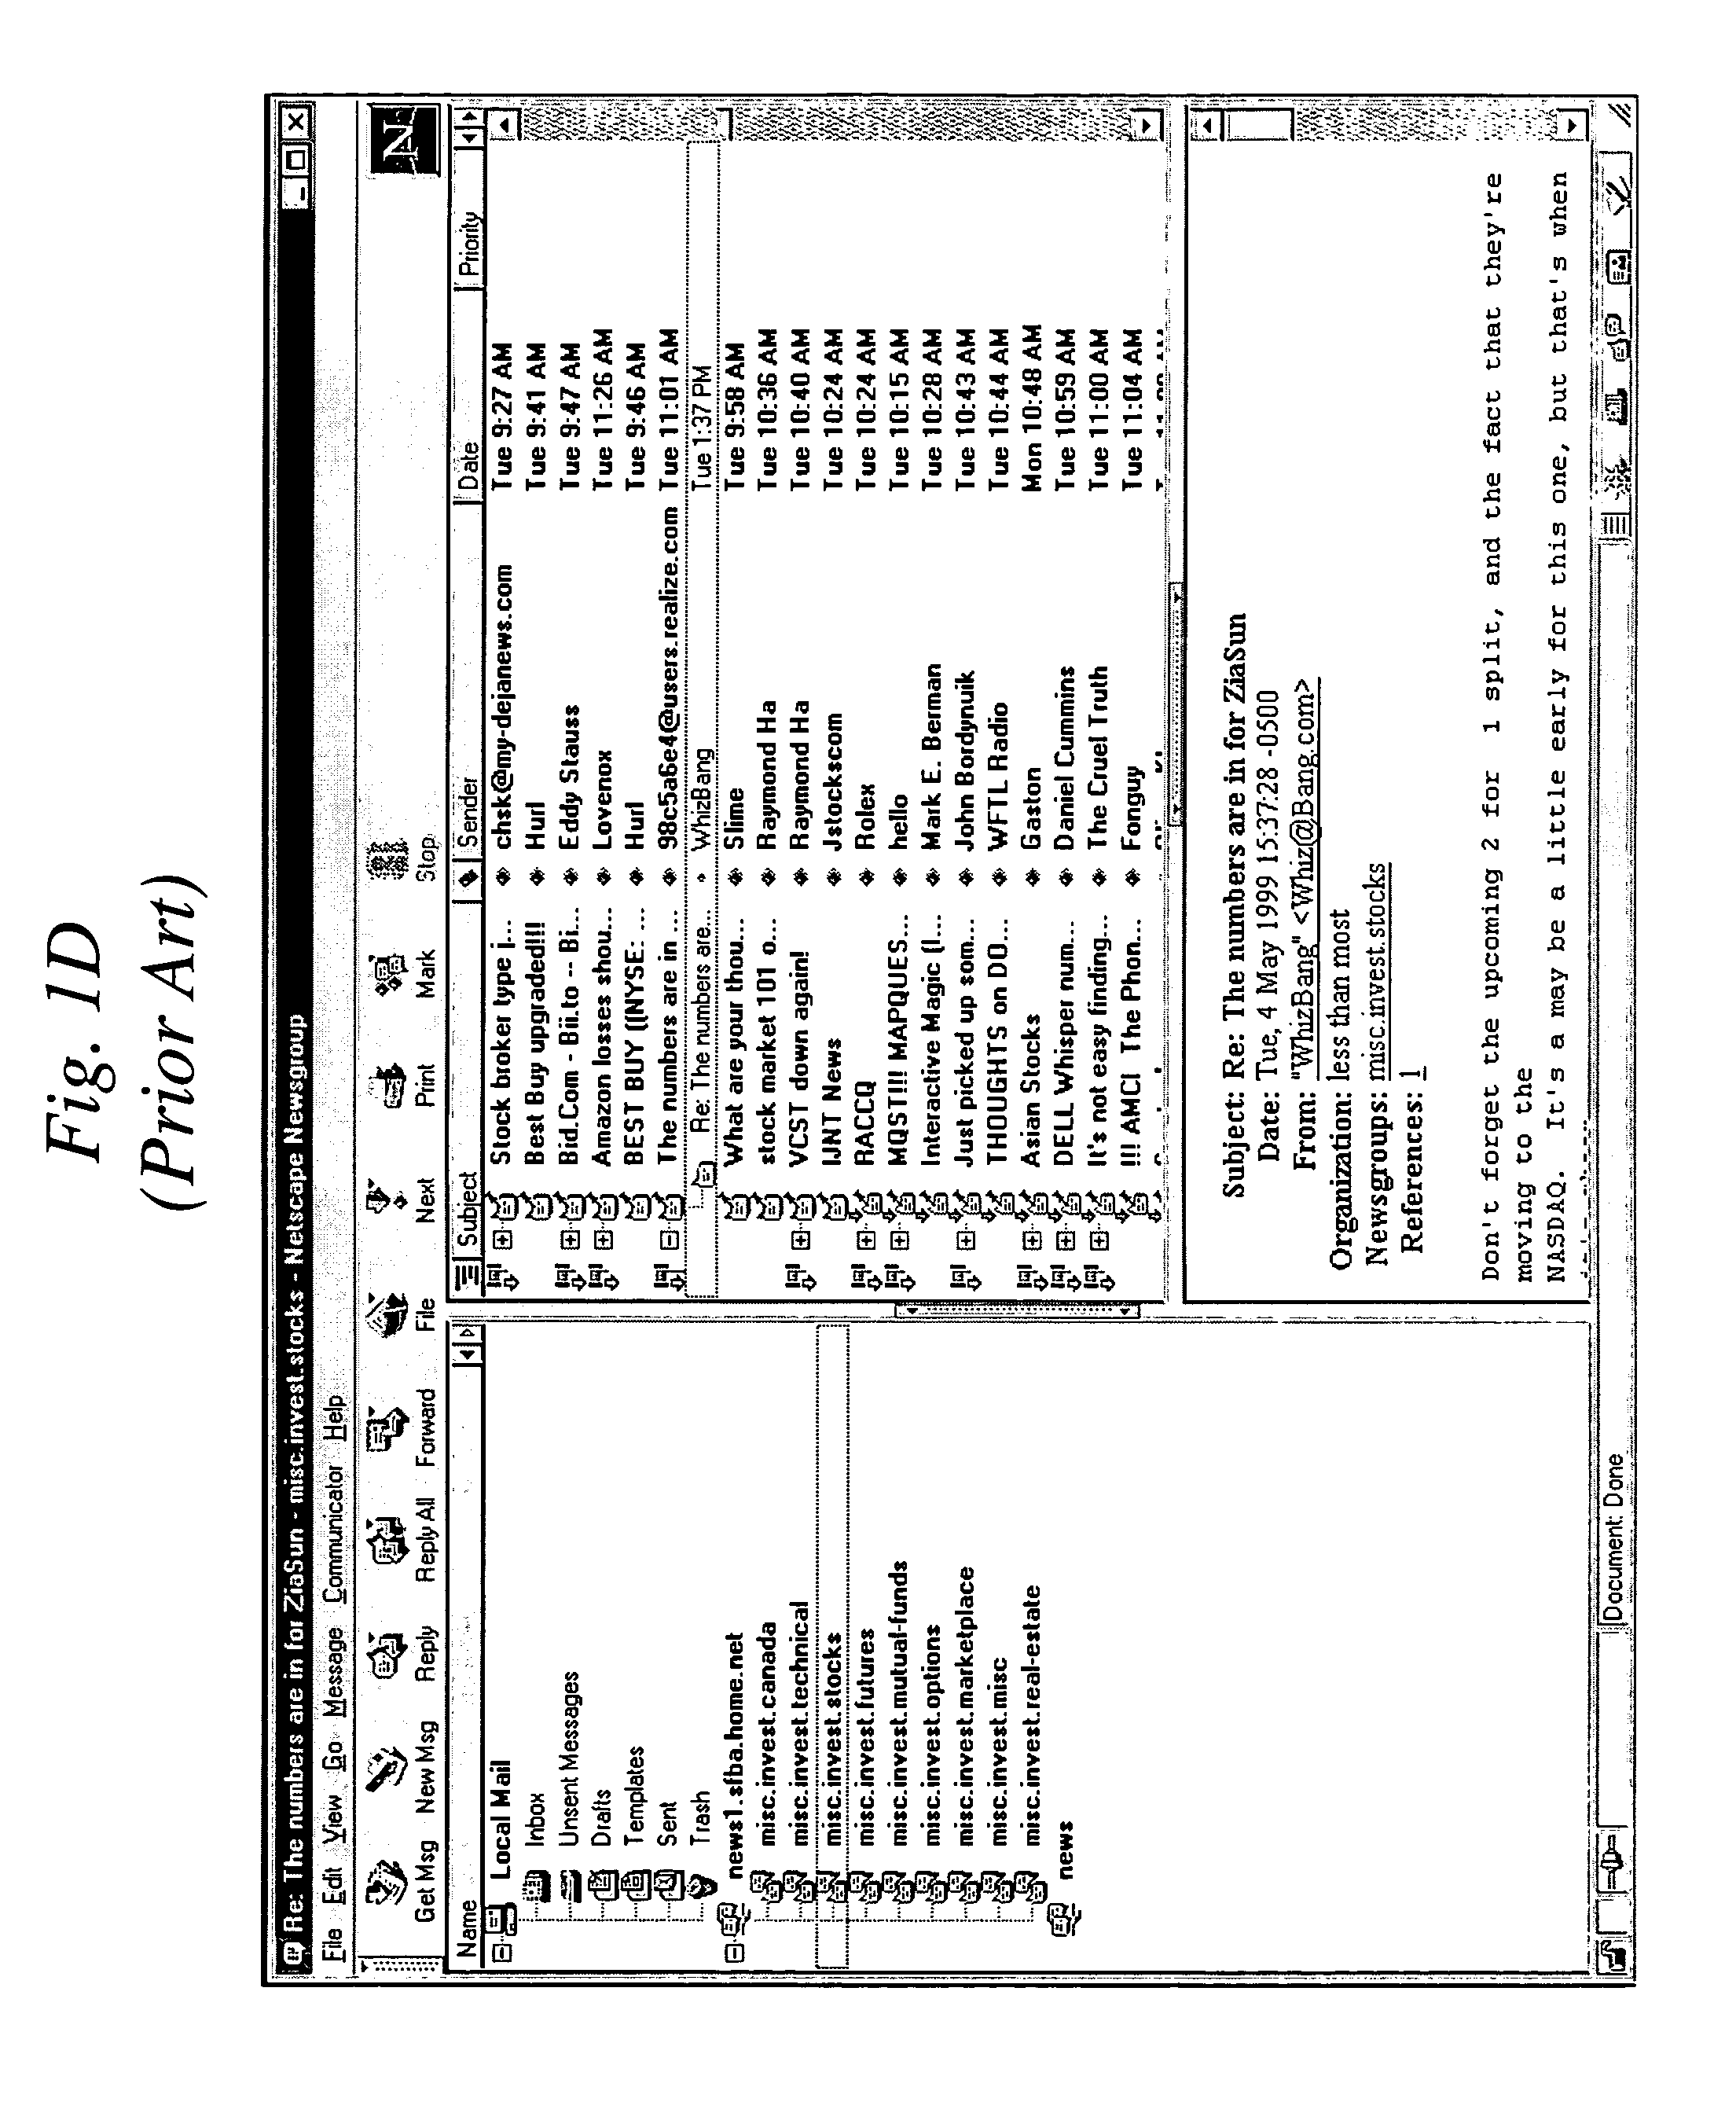 System and method for managing an online message board